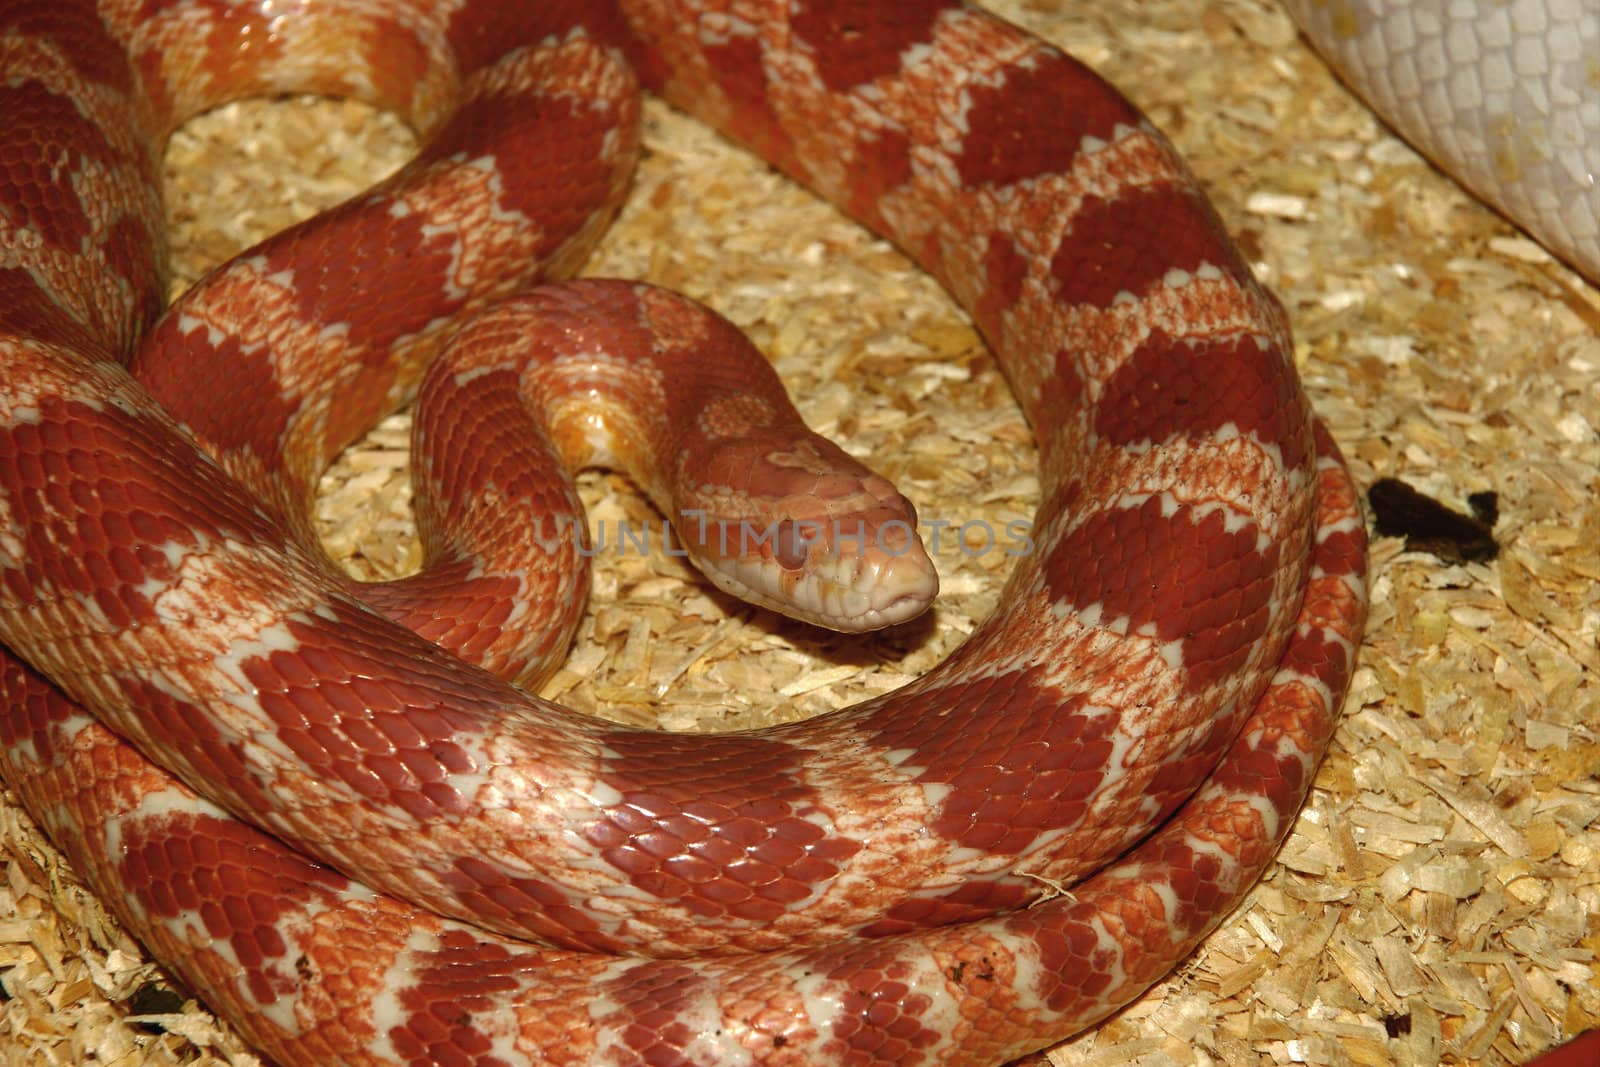 Corn Snake (Pantherophis guttatus) by tdietrich